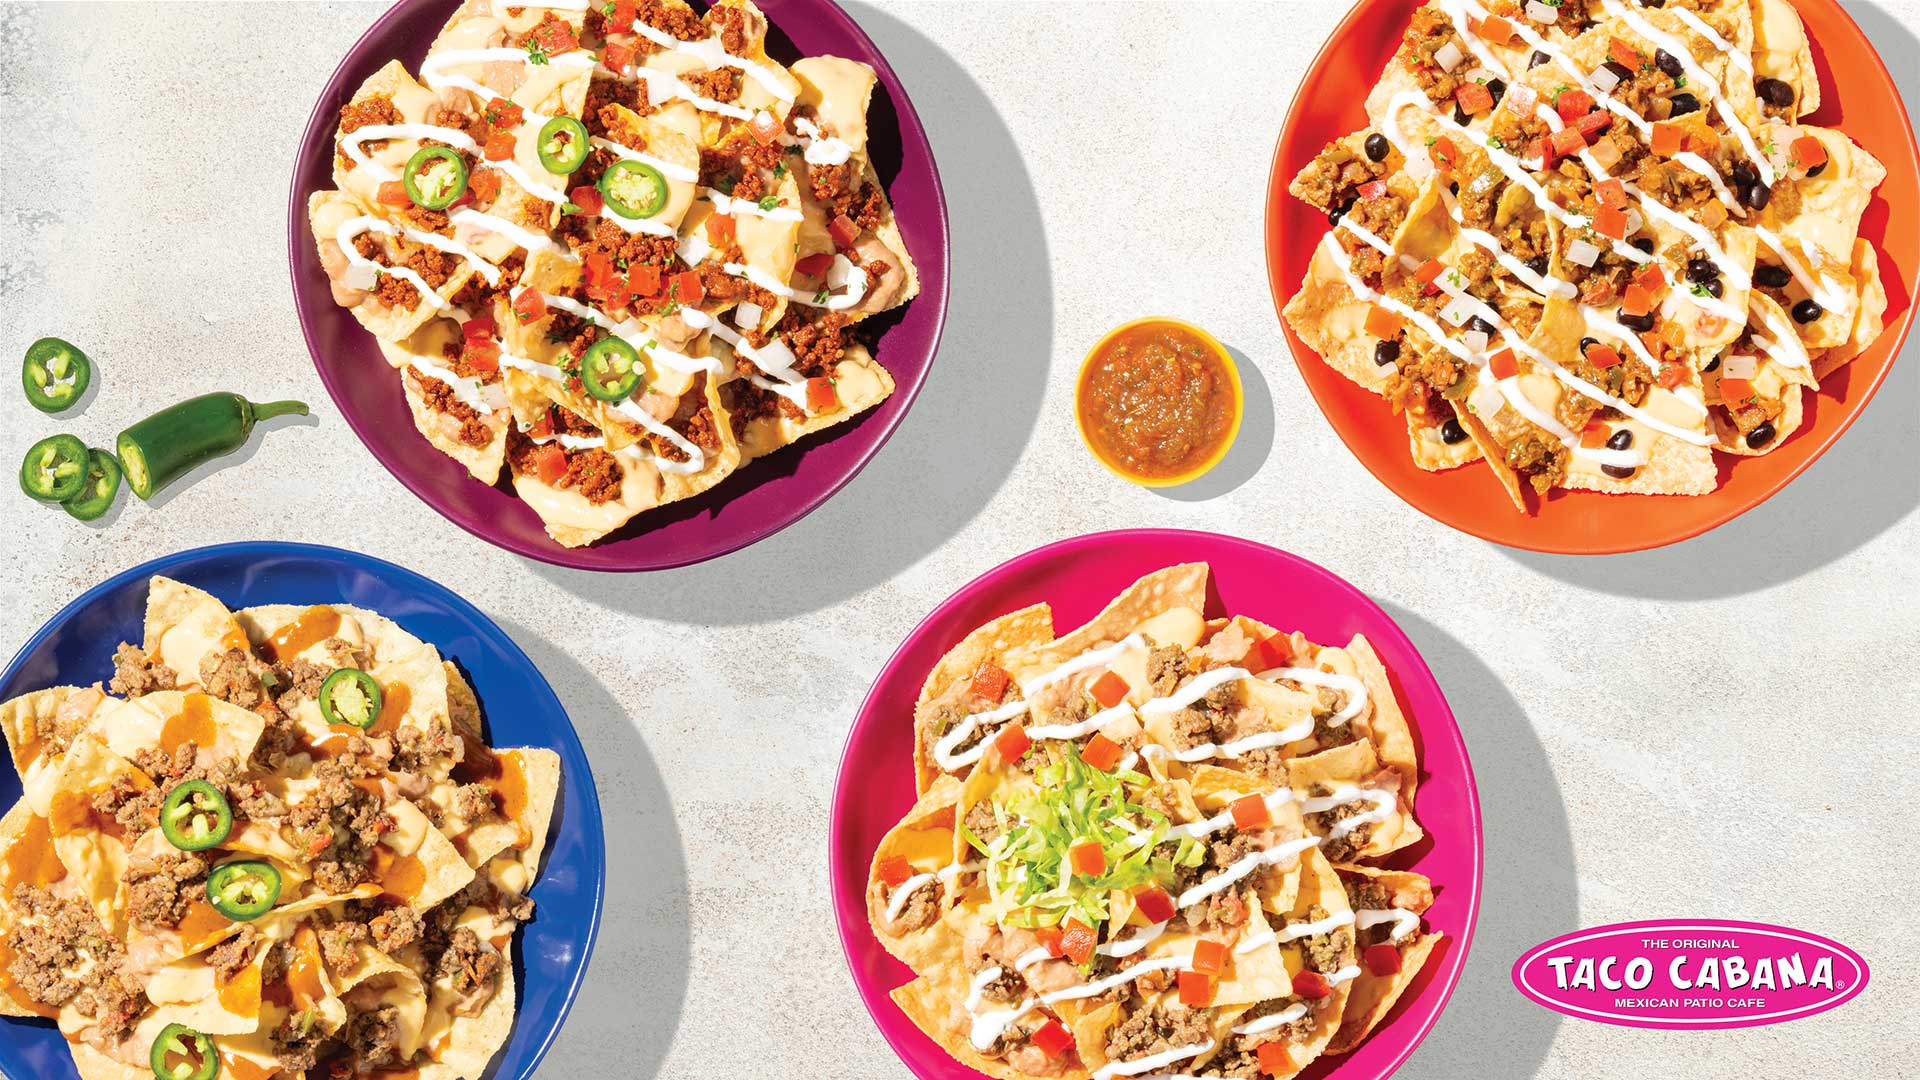 Fiesta Group Sells to Taco Cabana in a Huge $85M Move